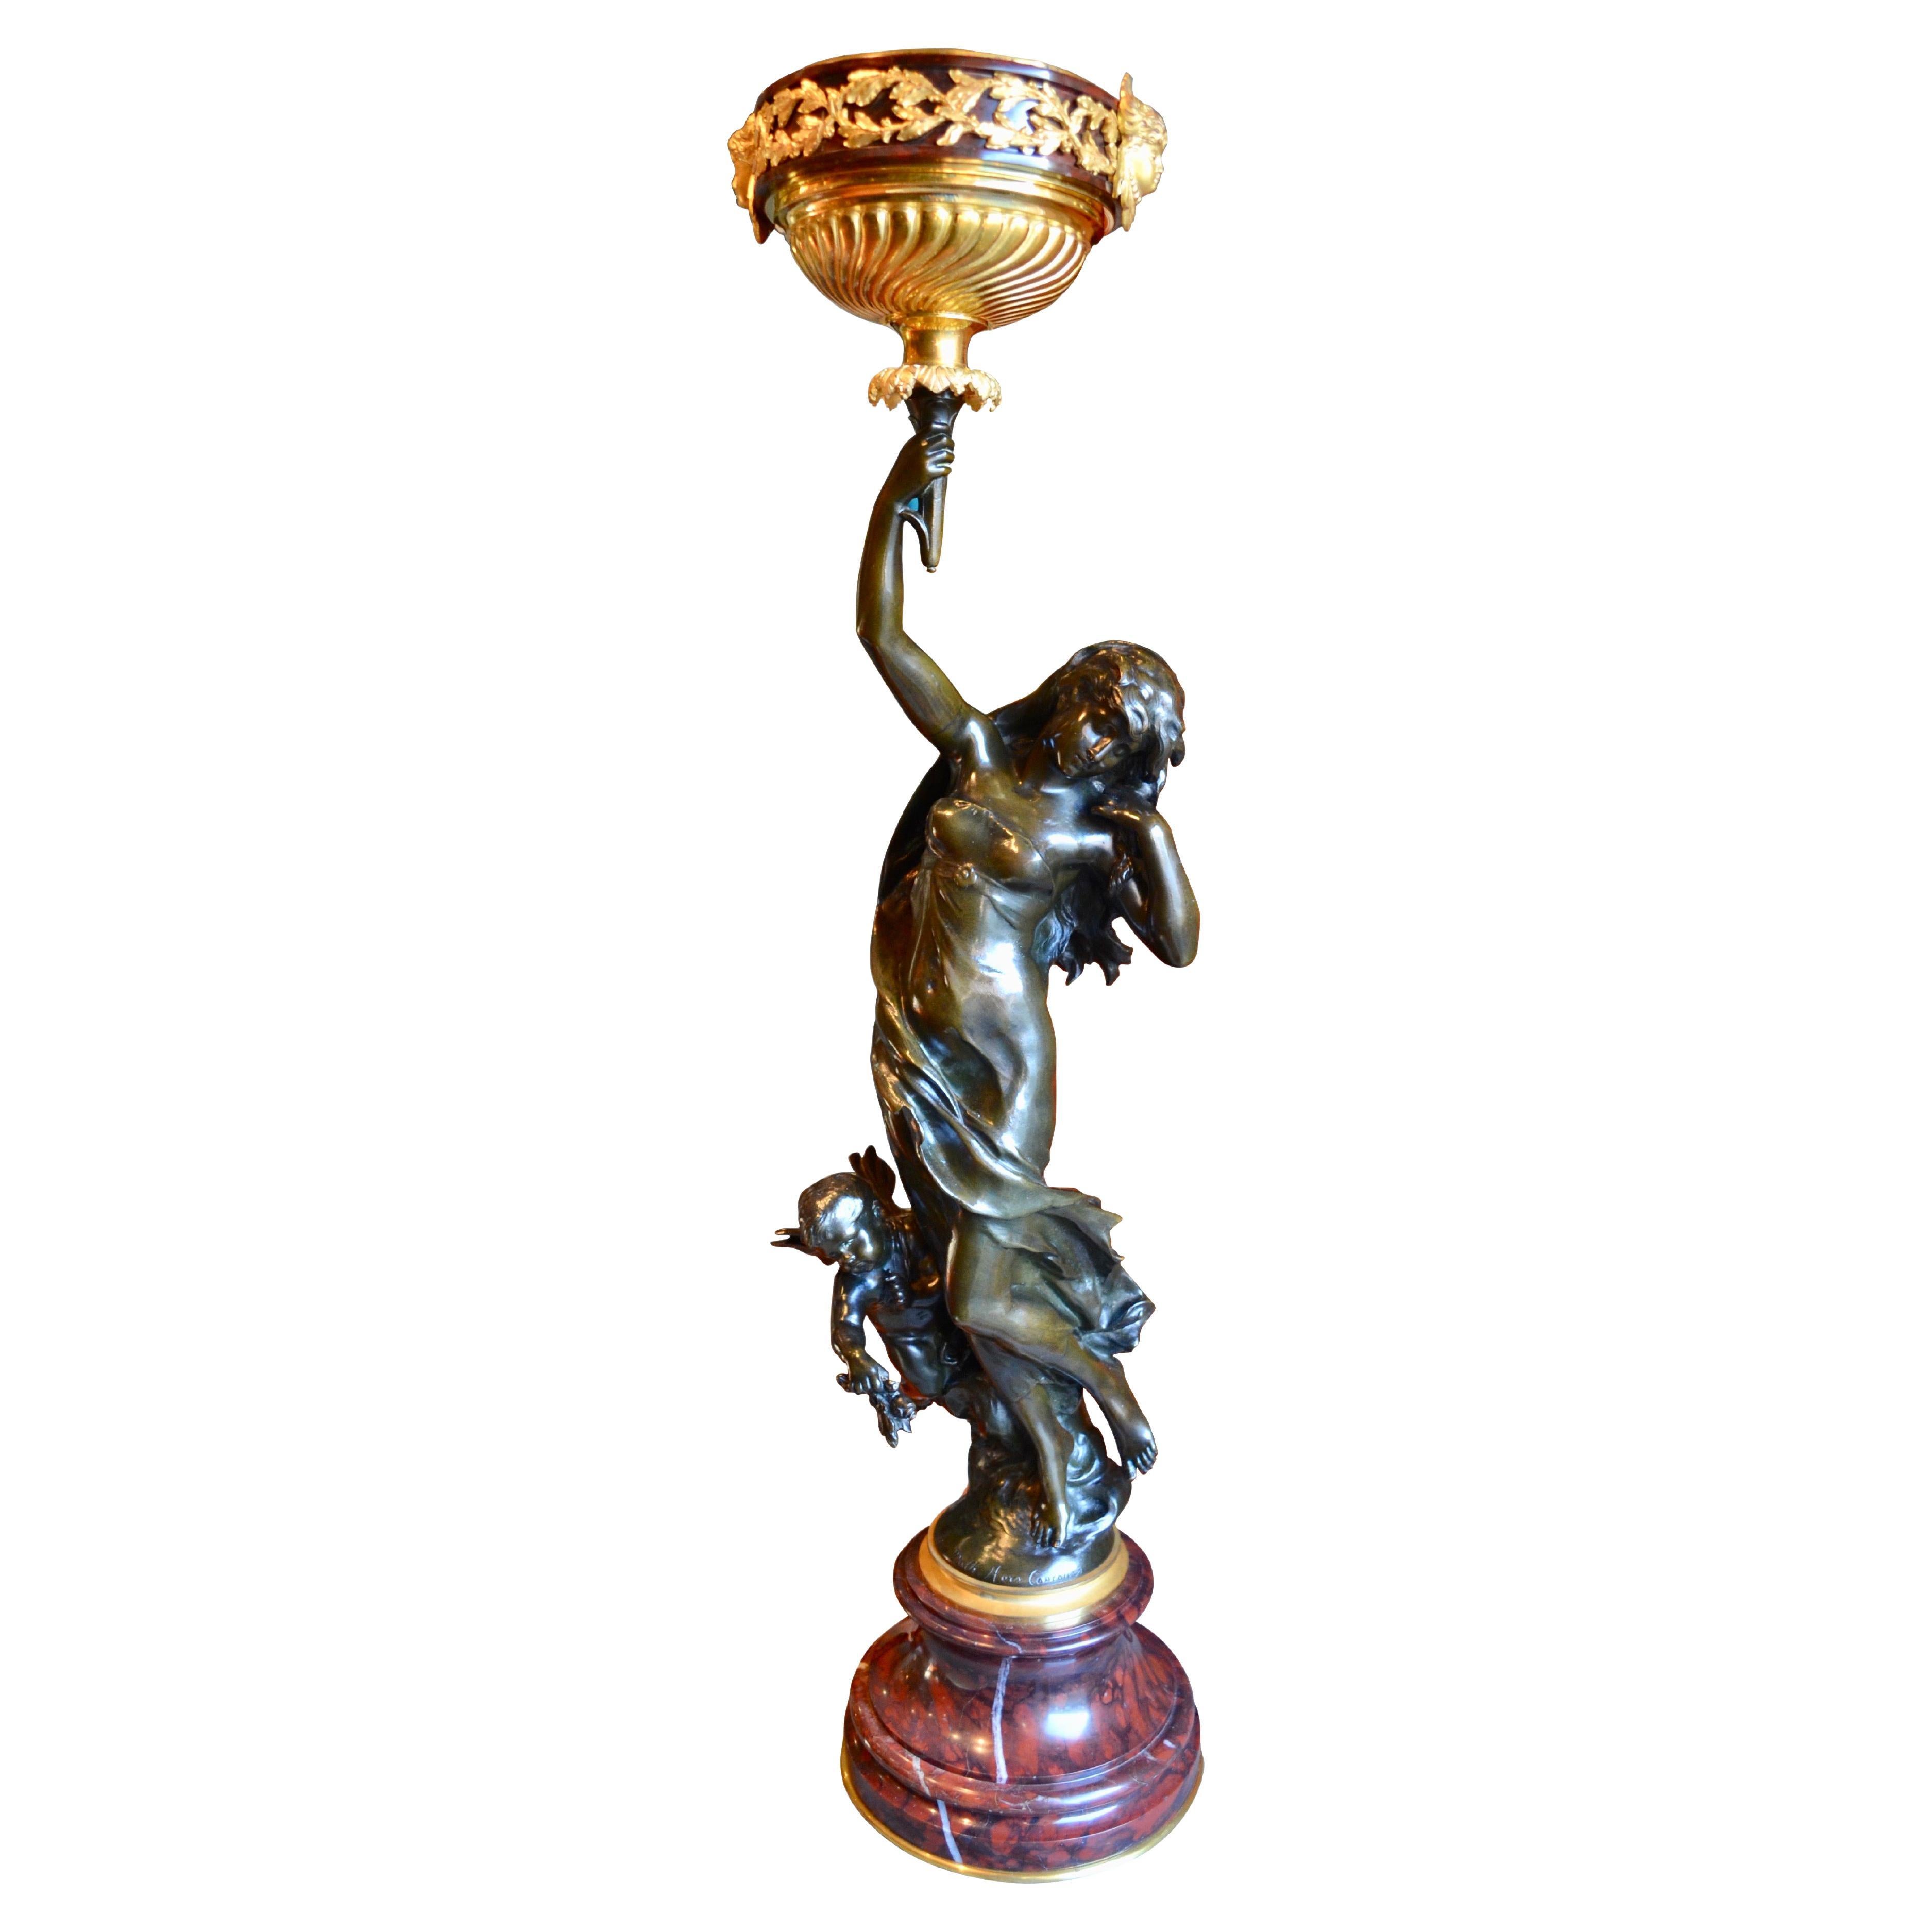  Oil Lamp Featuring a Mathurin Moreau Bronze Statue of  a Nymph and Putto   For Sale